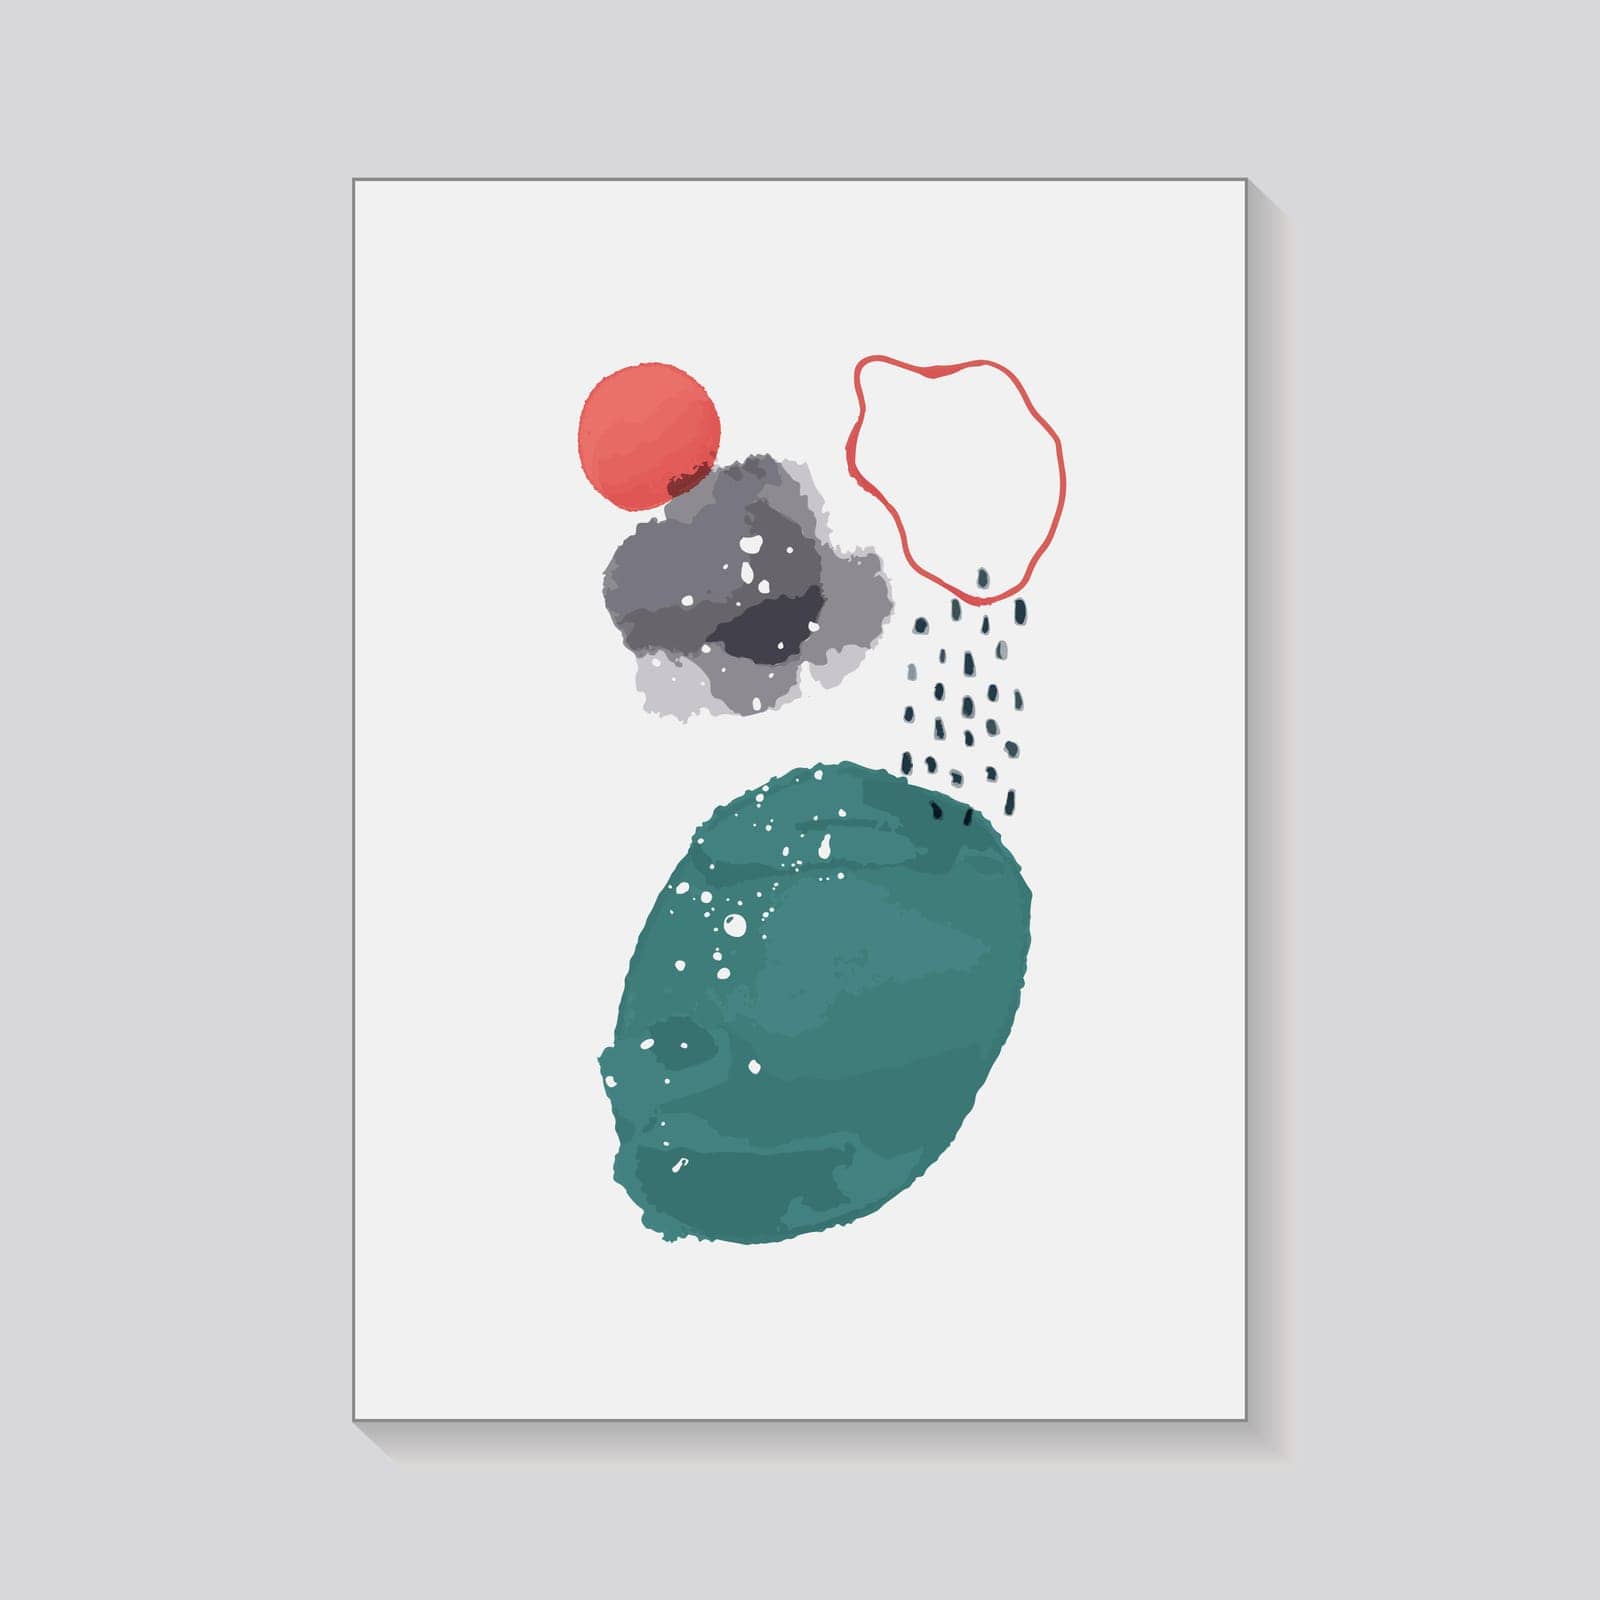 Minimal watercolor poster. Different vector painted shapes and lines.